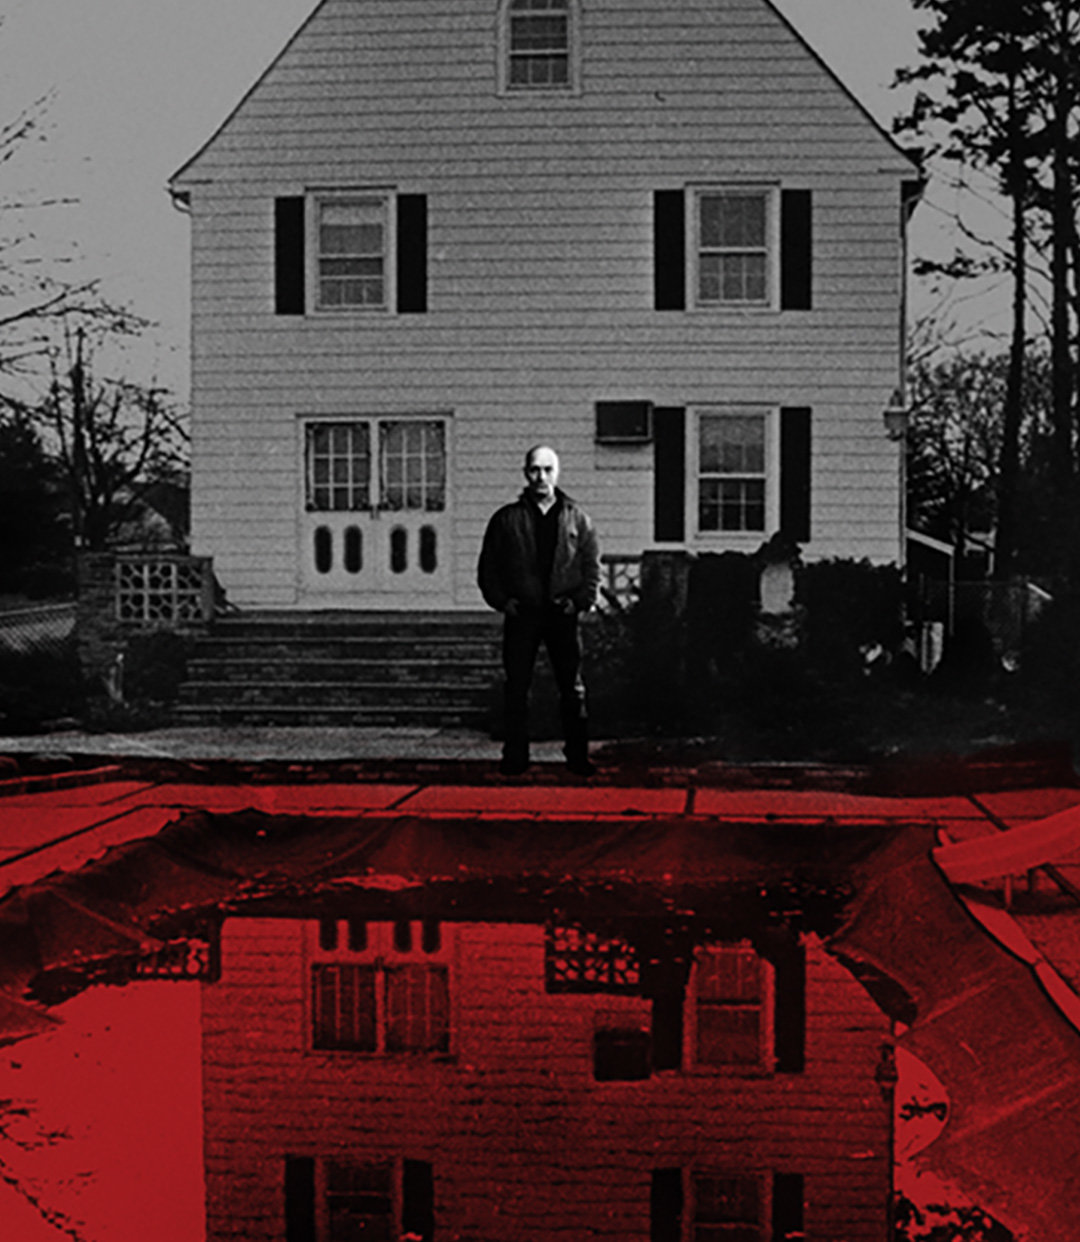 Amityville Horror' house on sale for $850,000